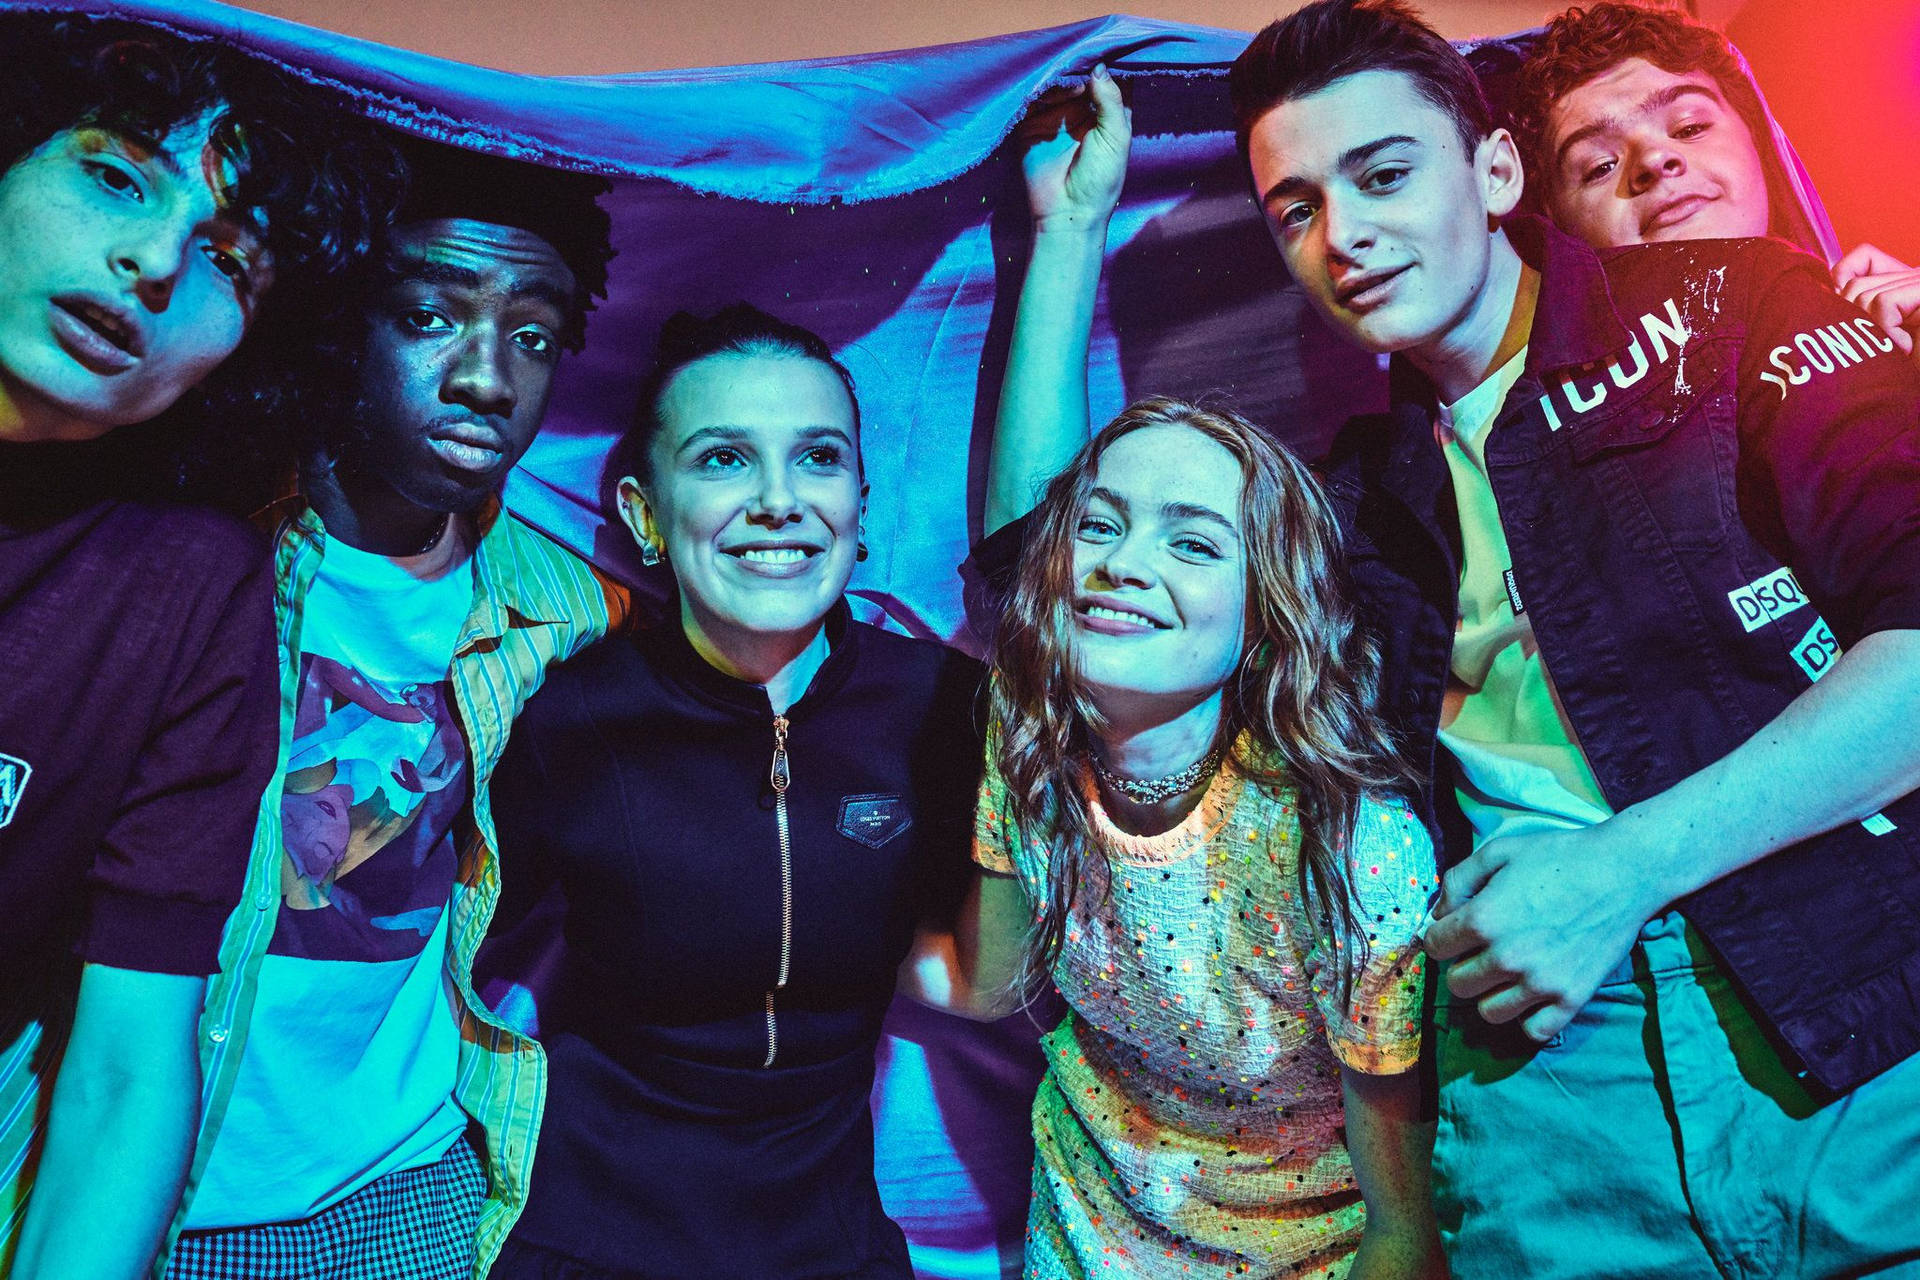 Sadie Sink With The Other Cast